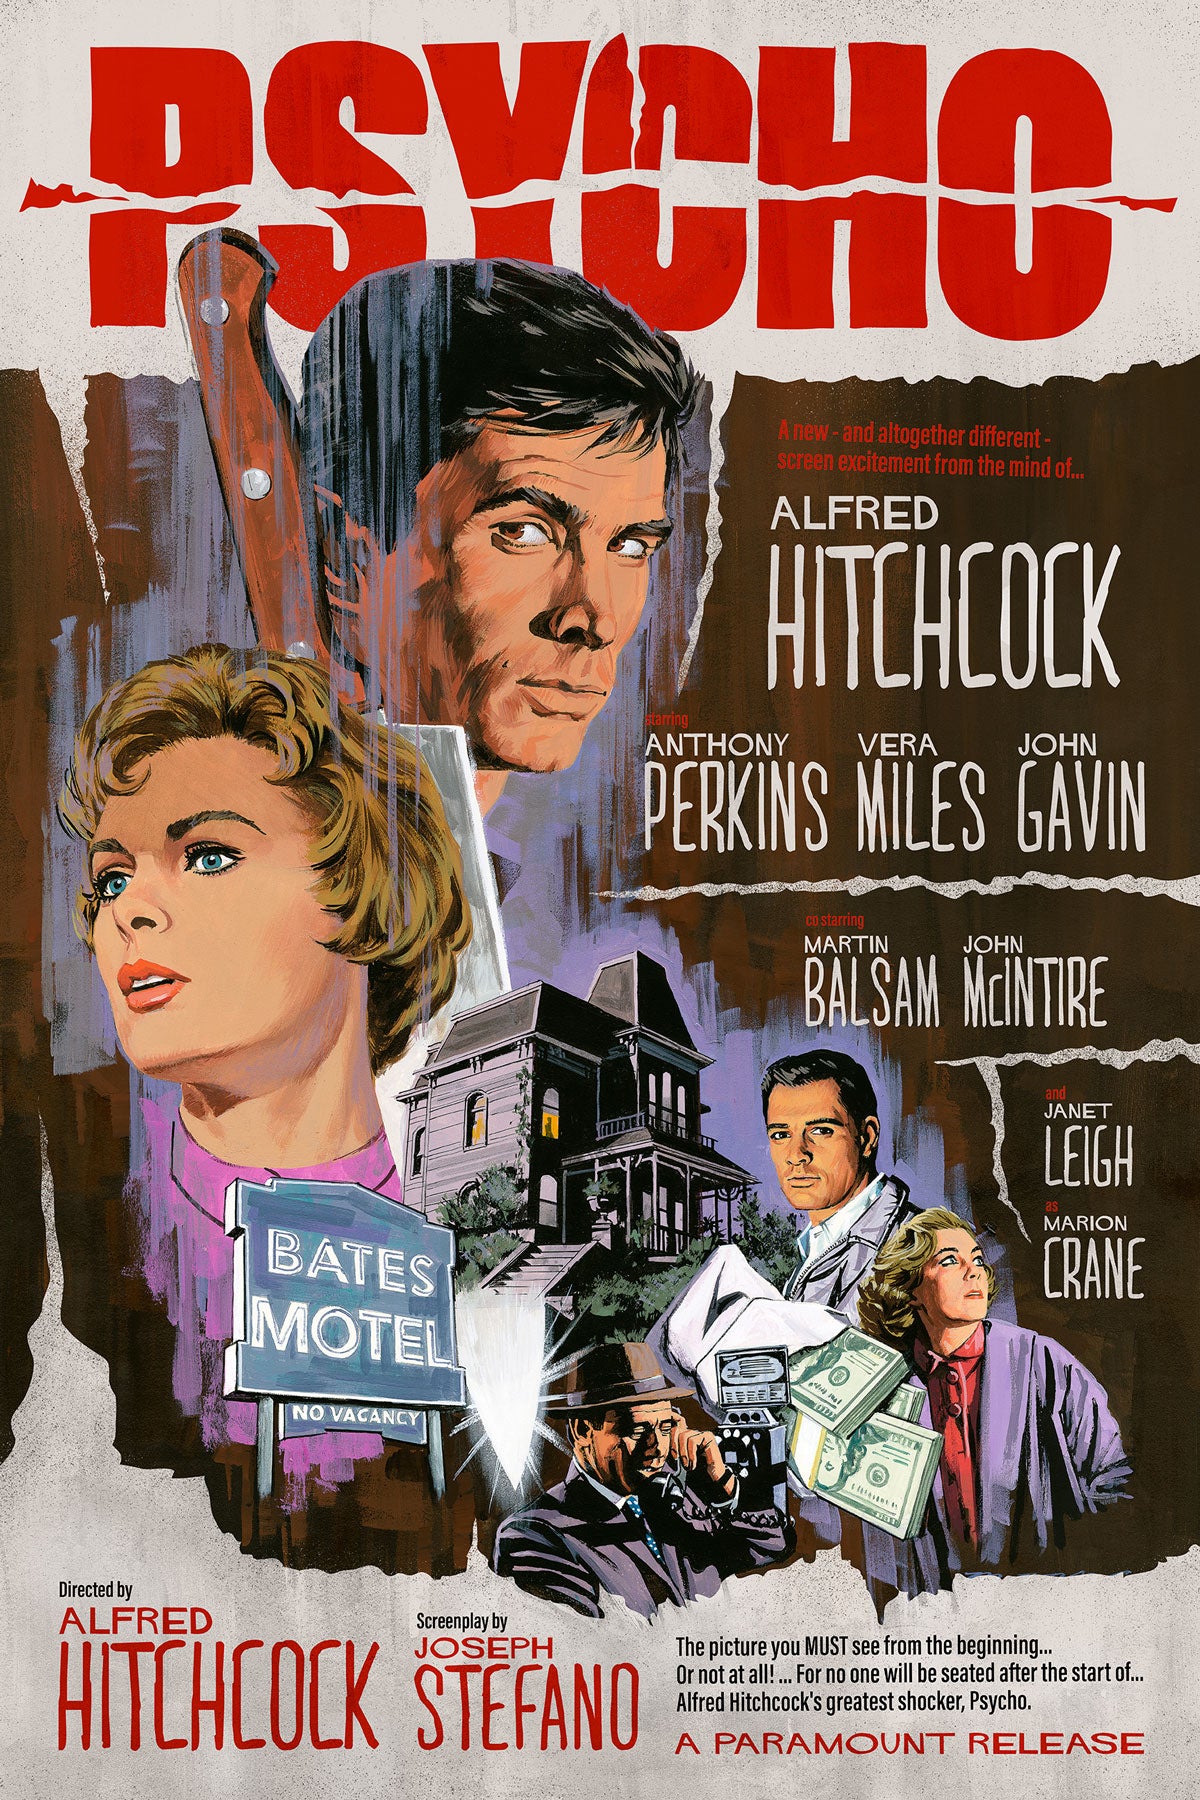 Psycho movie poster by Paul Mann